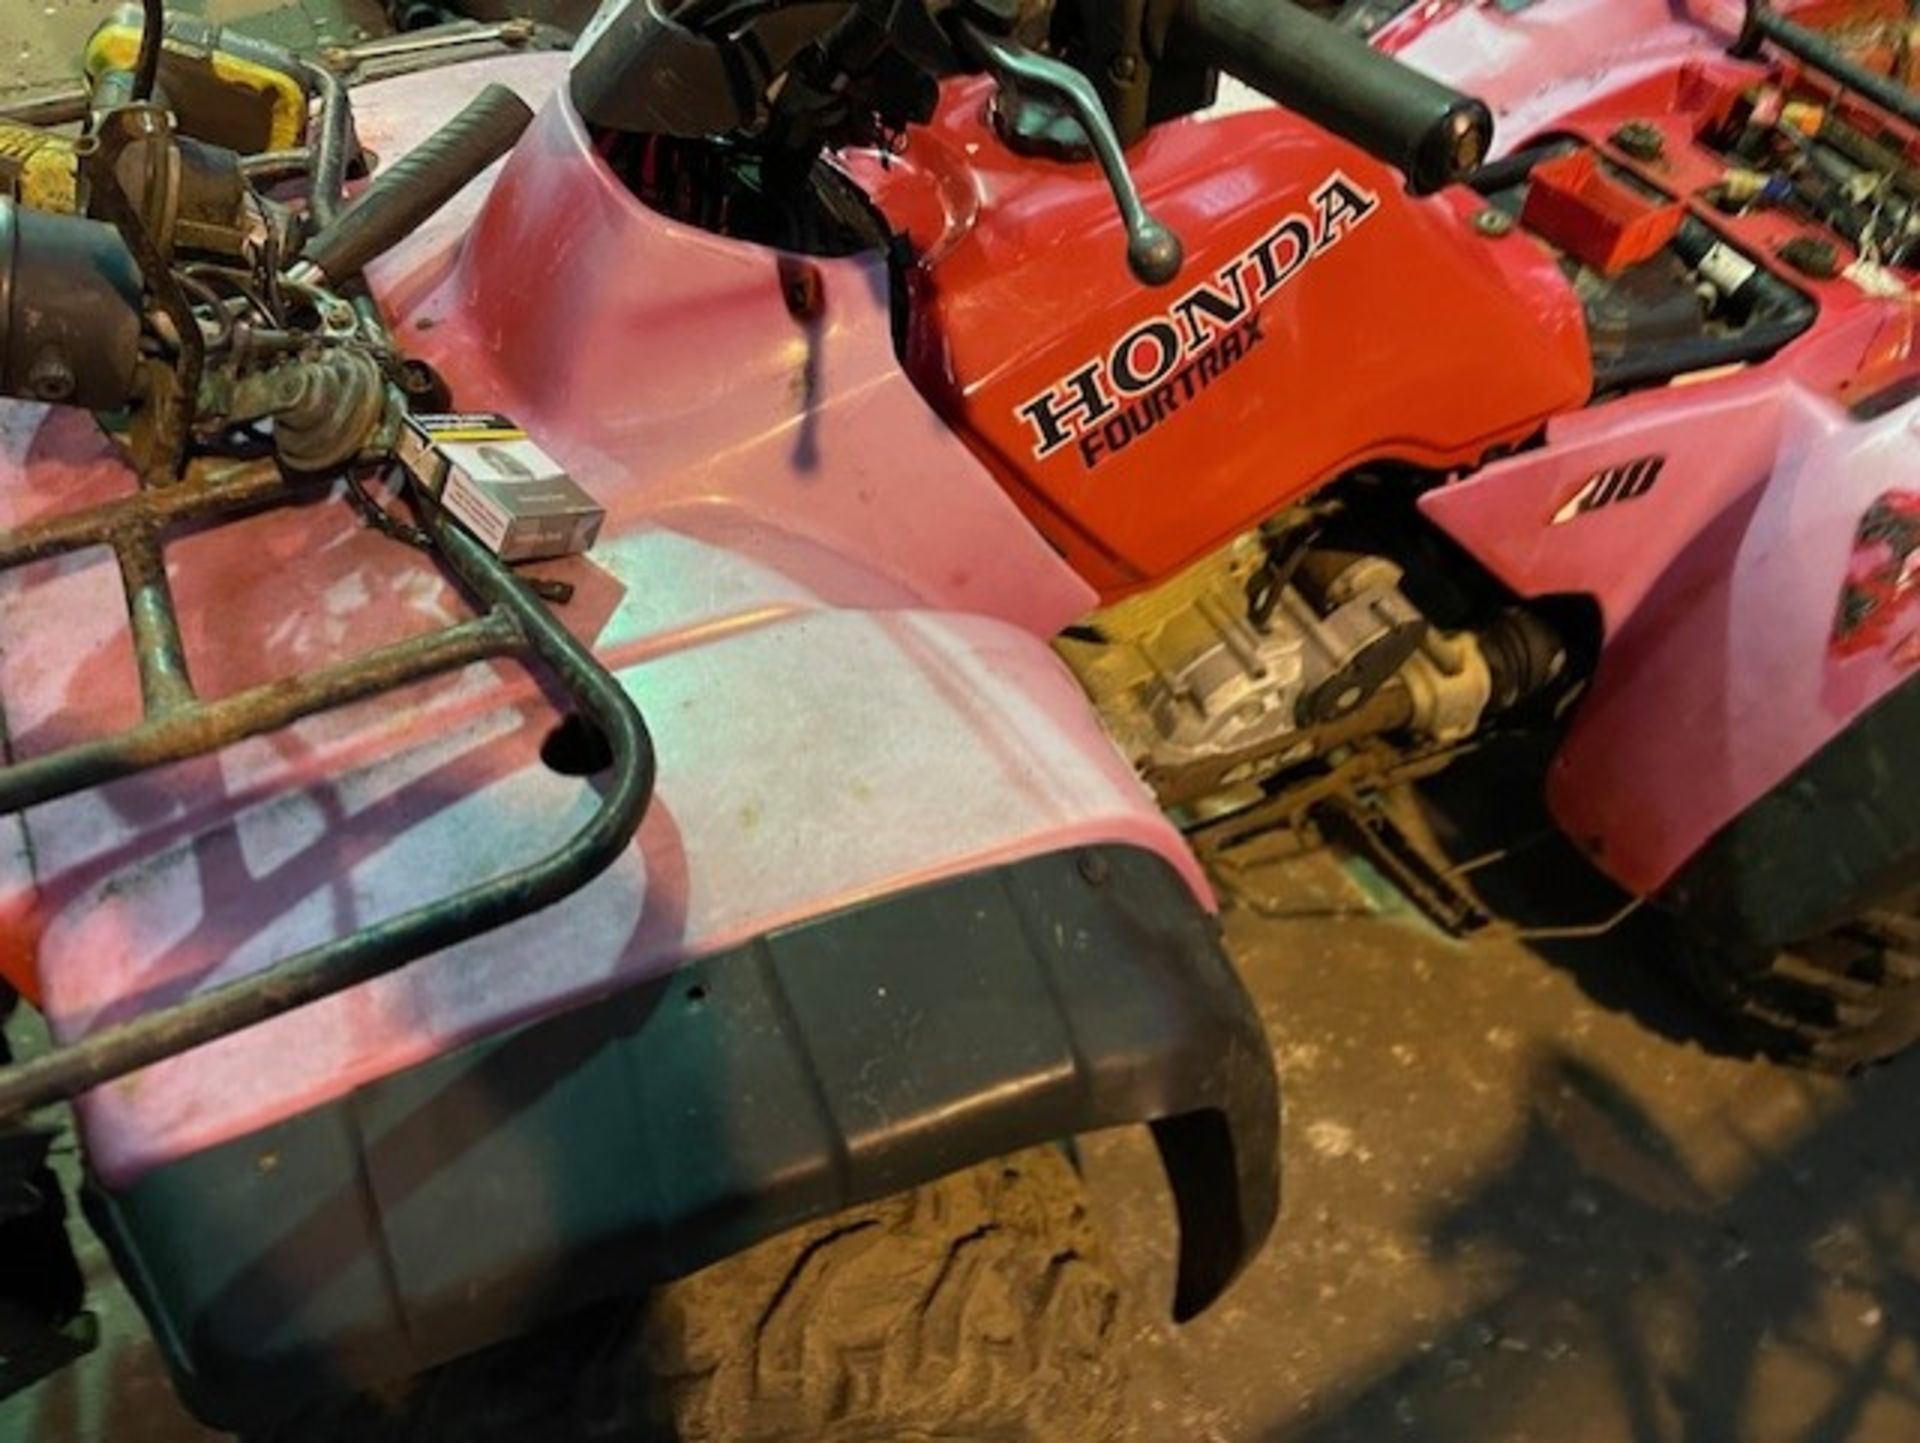 Honda fortrax quad bike late 80s non runner all together - Image 6 of 7